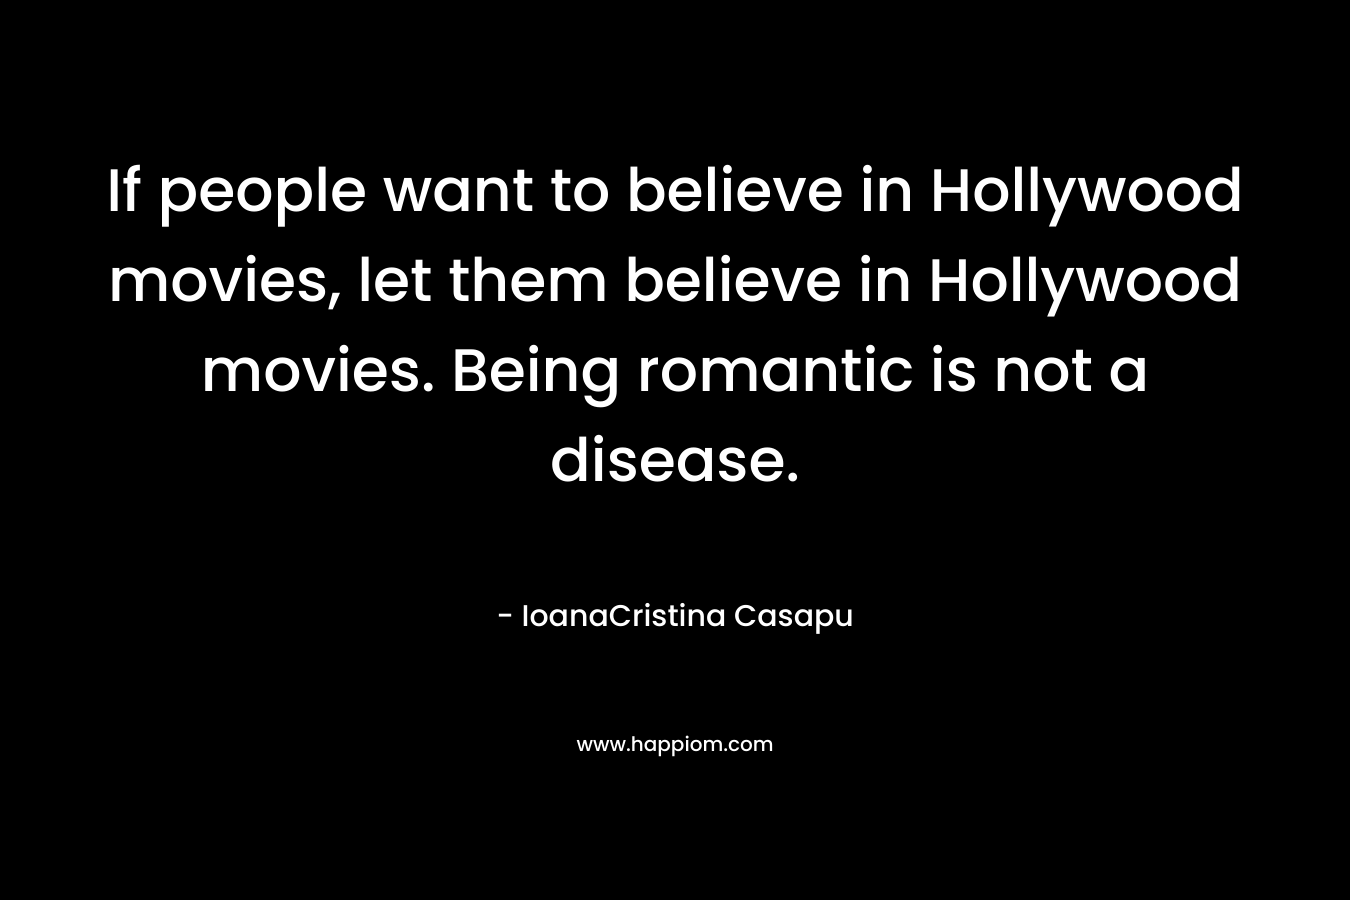 If people want to believe in Hollywood movies, let them believe in Hollywood movies. Being romantic is not a disease.